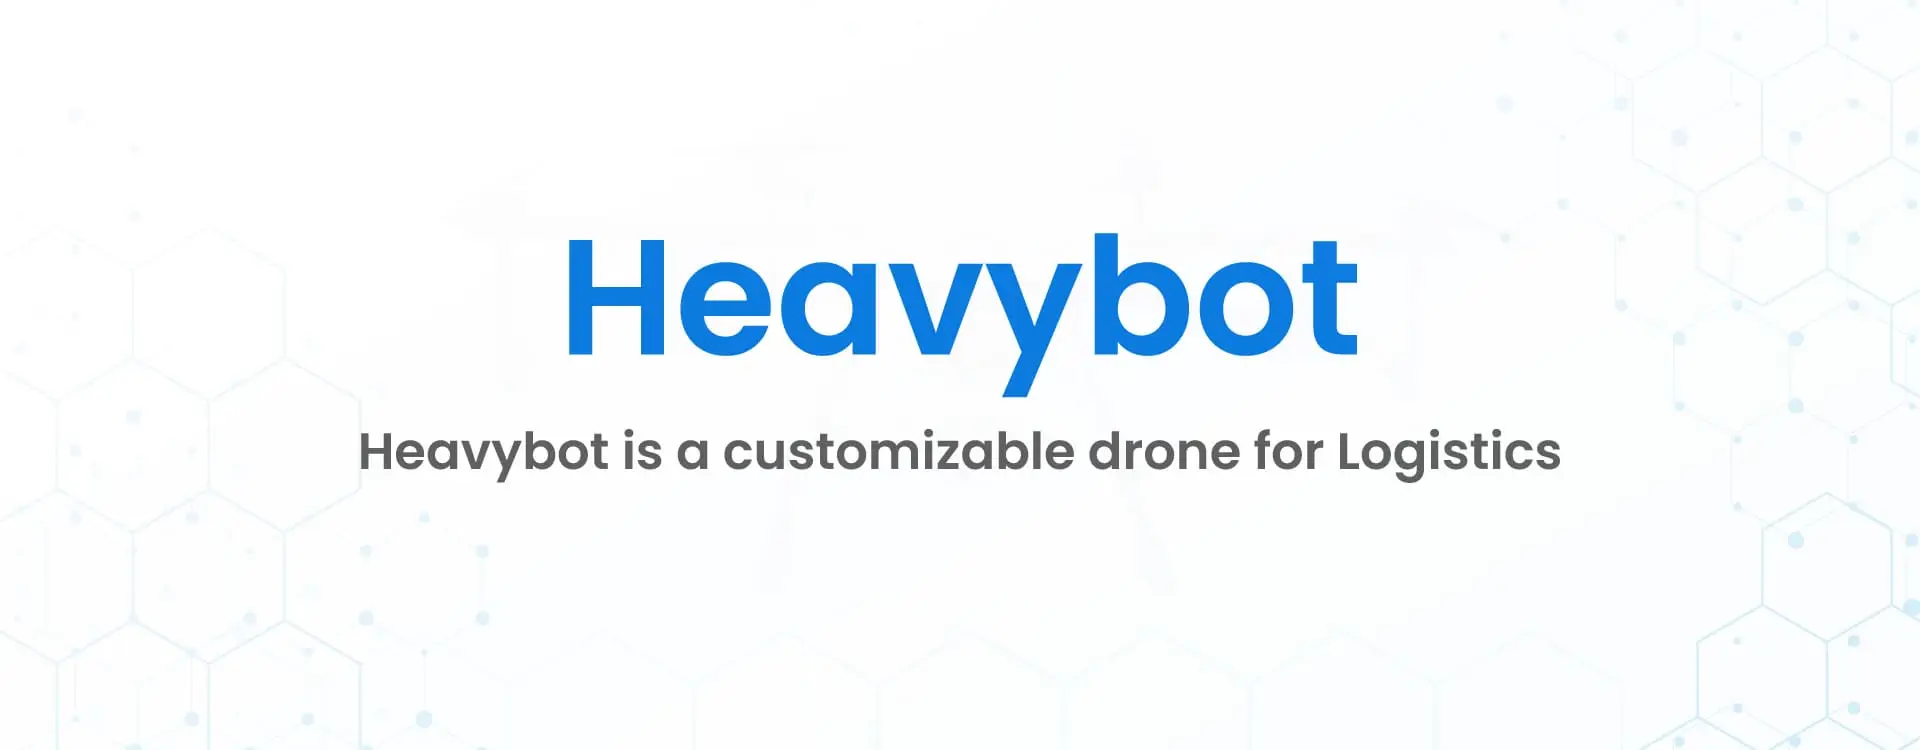 Heavybot is a customizeable drone for Logistics